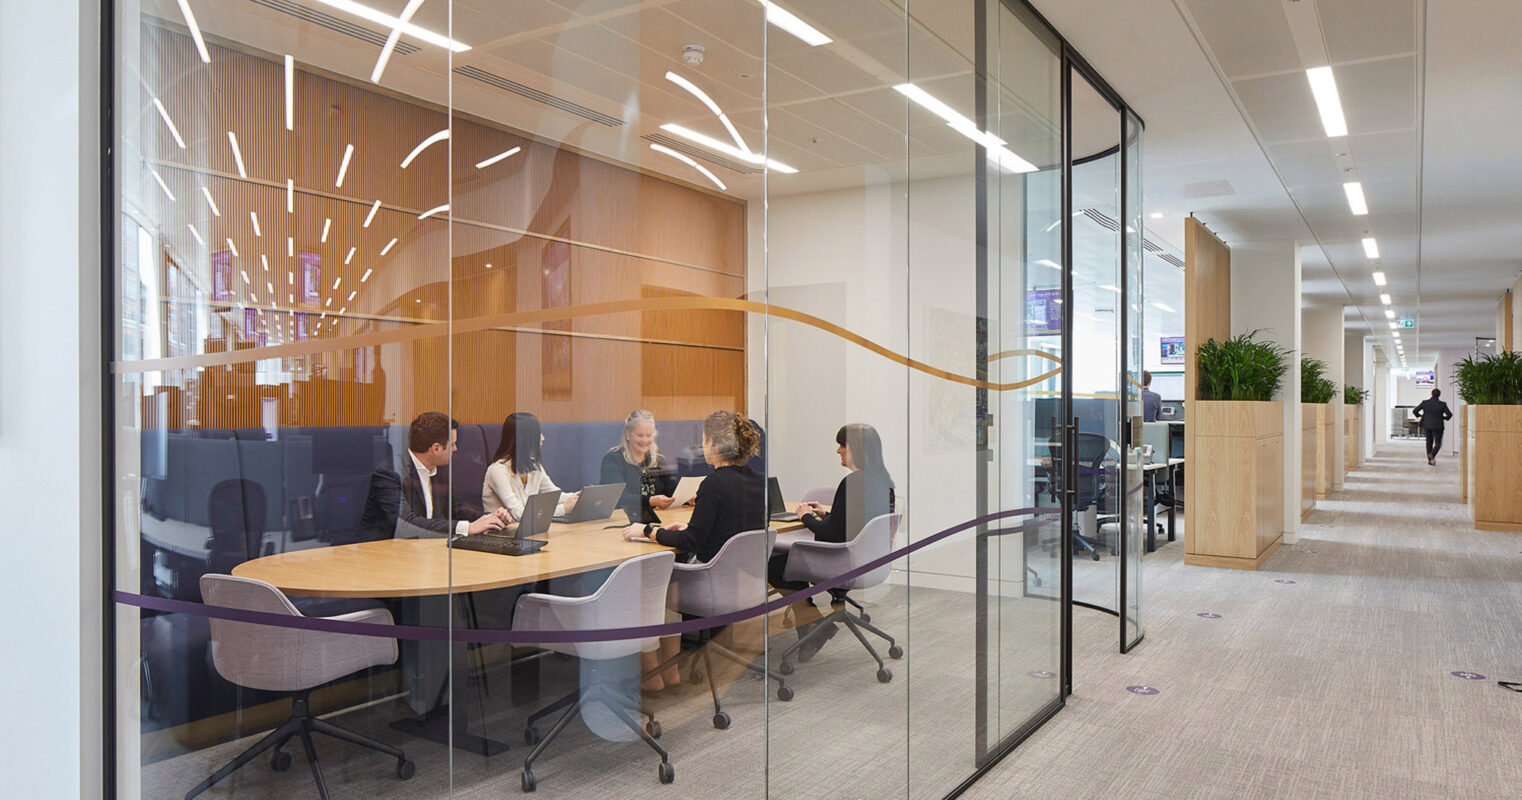 Modern office interior with open plan layout showcases clear glass partitions, wood veneer panels, and a streamlined oval conference table. Dynamic lighting accents above complement the natural light, while a collaborative meeting unfolds in the functional and stylish space.